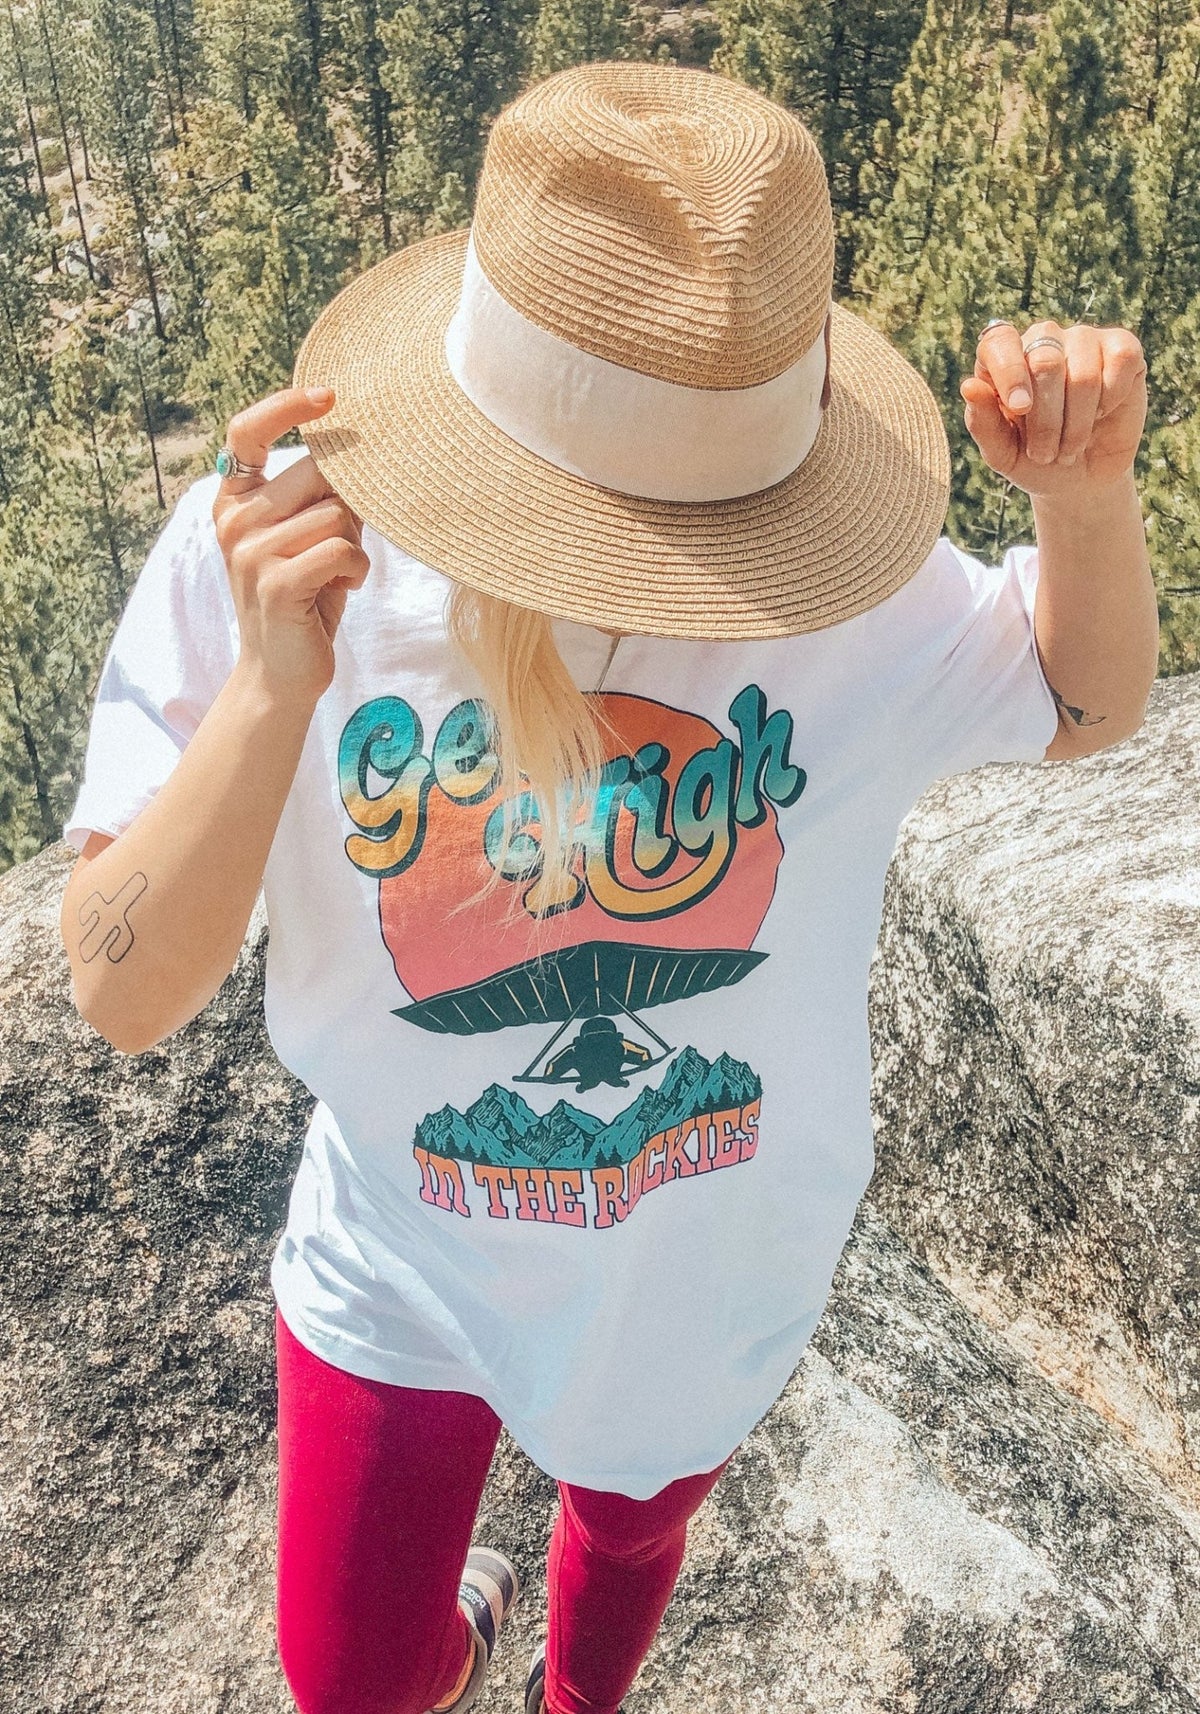 Get High In The Rockies Vintage National Park Rock T-Shirt